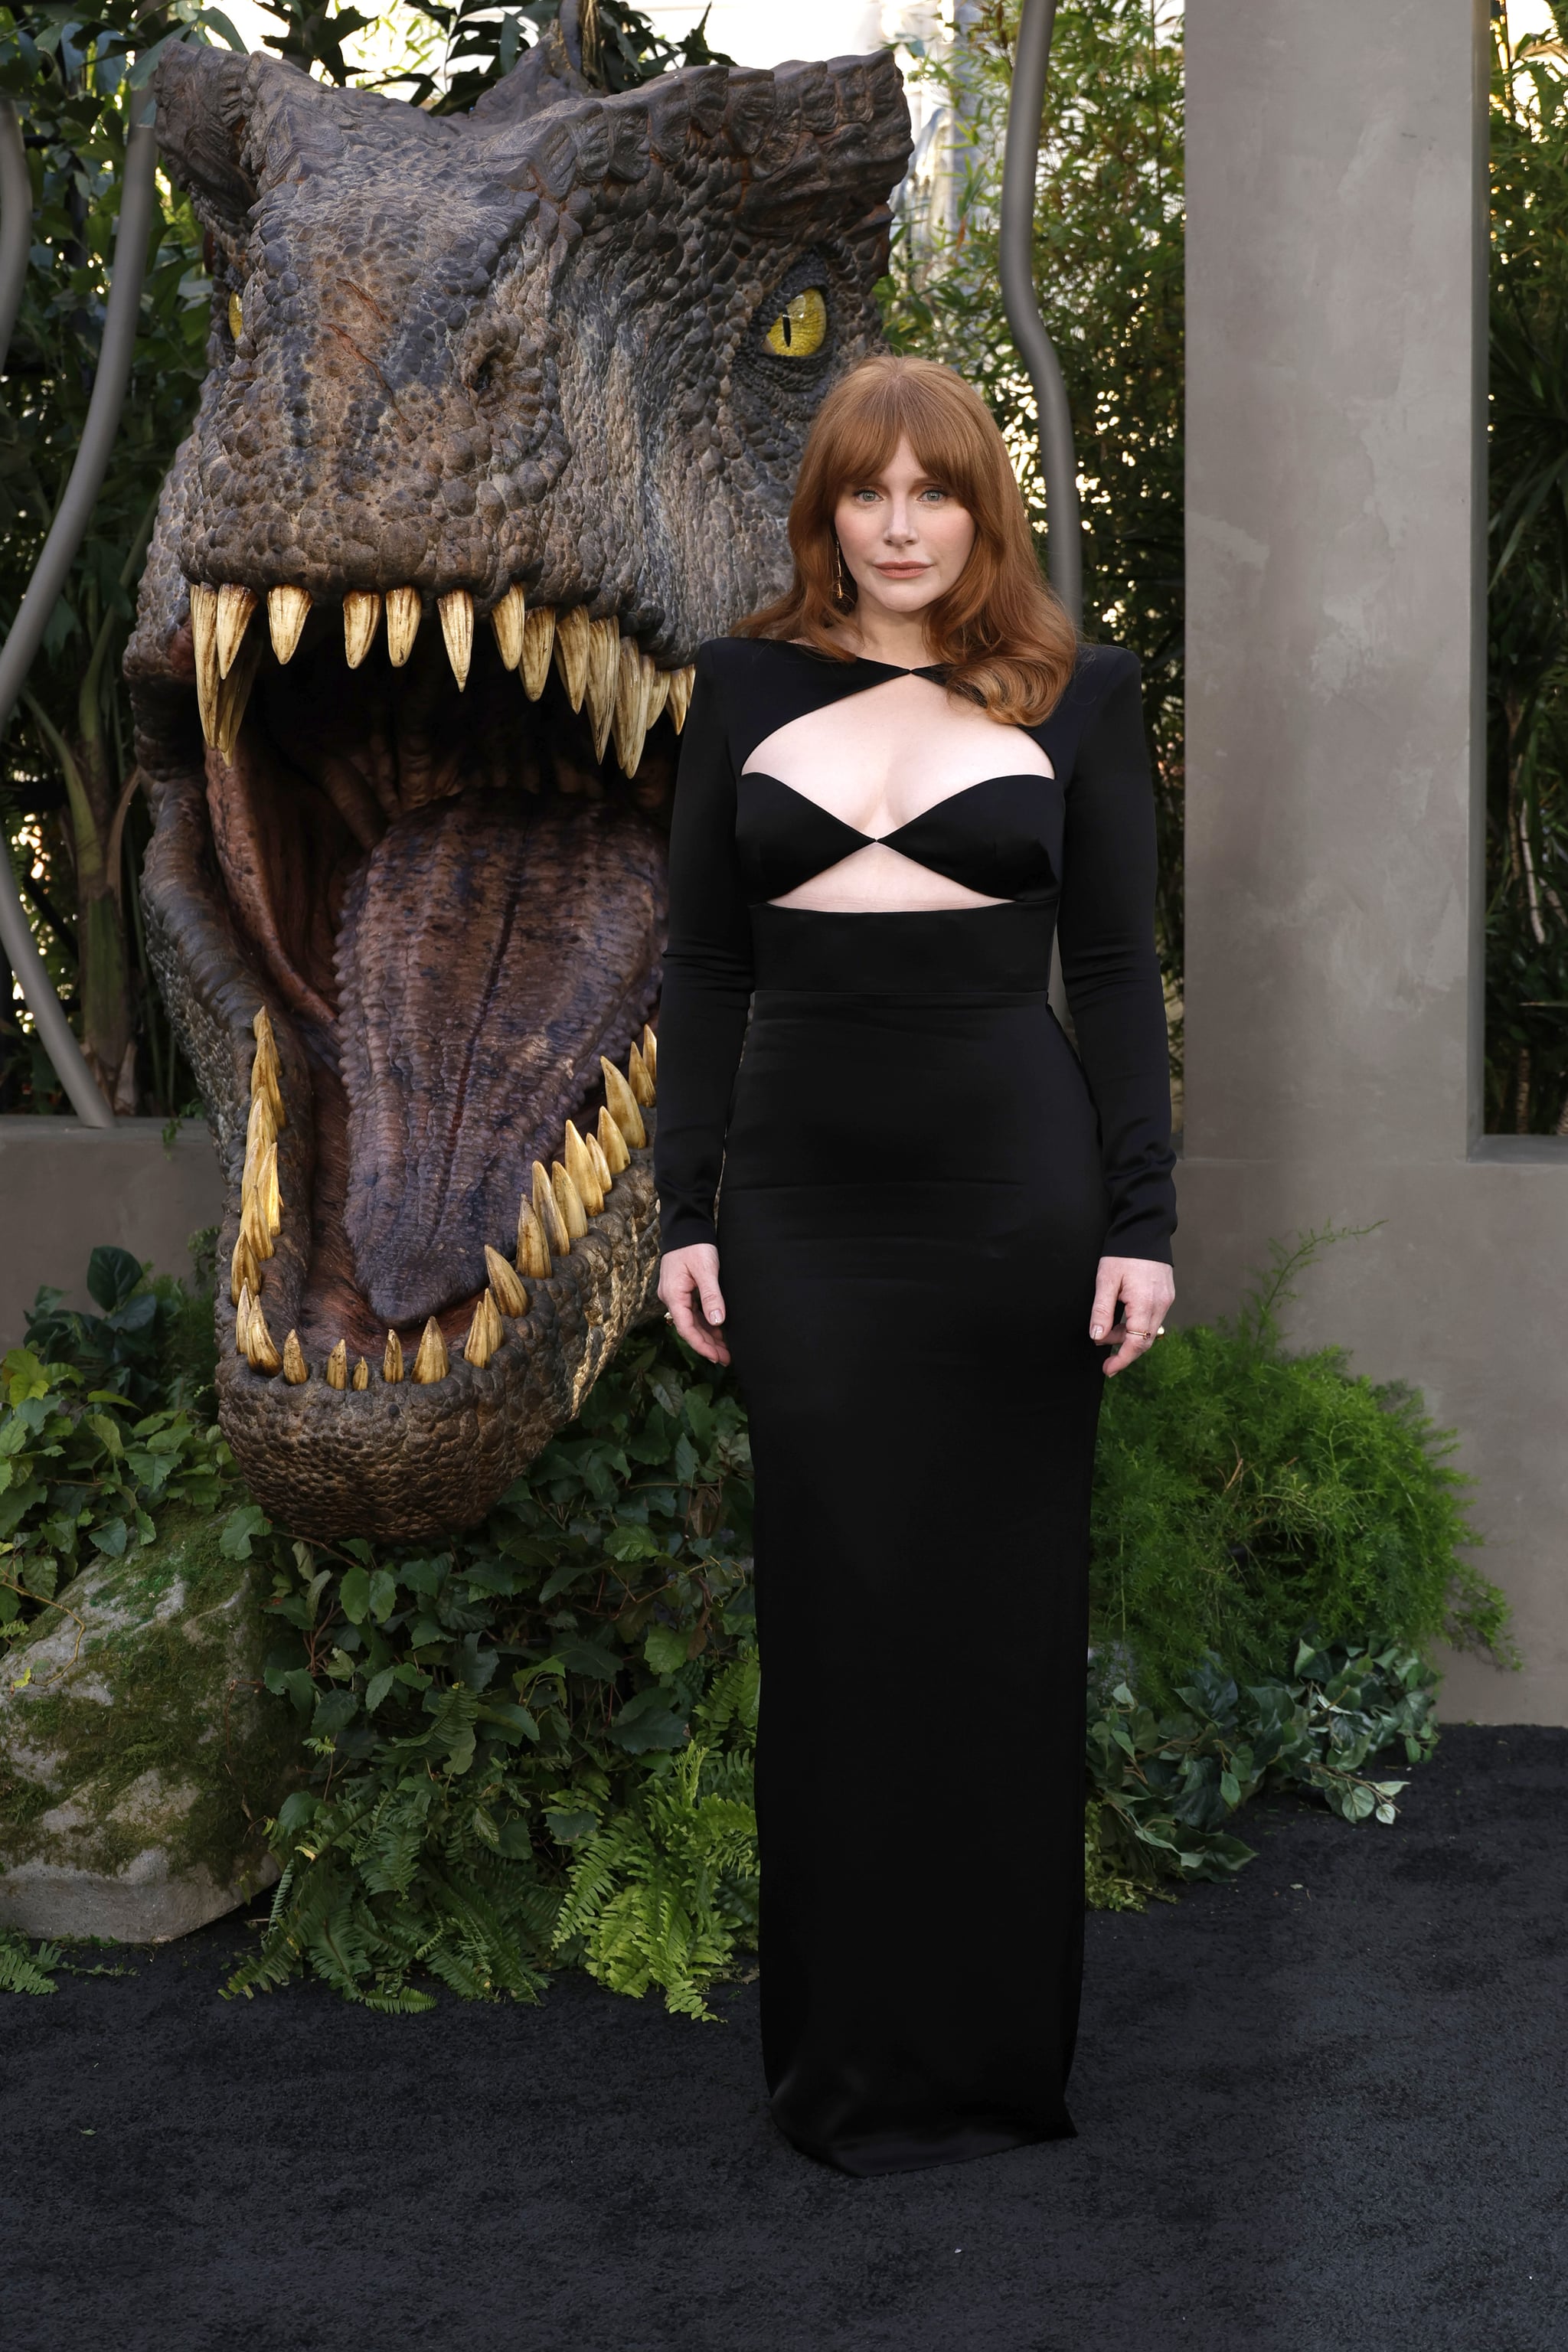 HOLLYWOOD, CALIFORNIA - JUNE 06: Bryce Dallas Howard attends the Los Angeles premiere of Universal Pictures' 